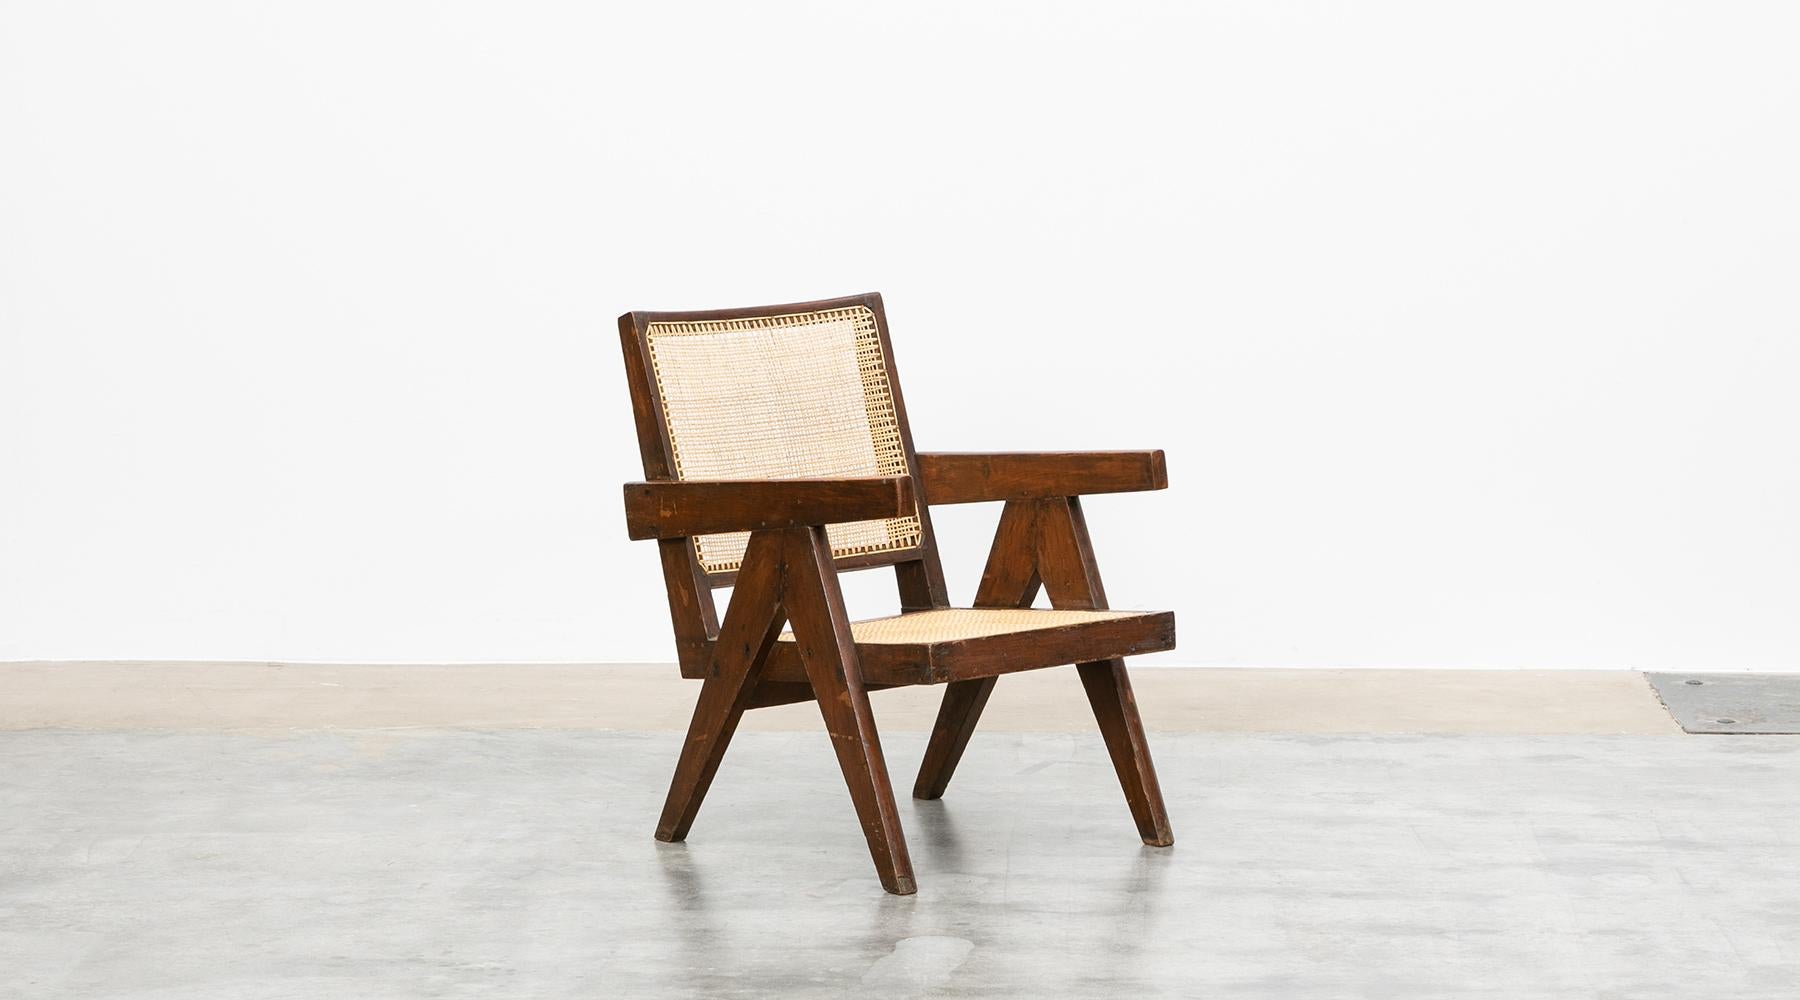 Single 1950s Brown Wooden Teak and Cane Lounge Chair by Pierre Jeanneret In Good Condition For Sale In Frankfurt, Hessen, DE